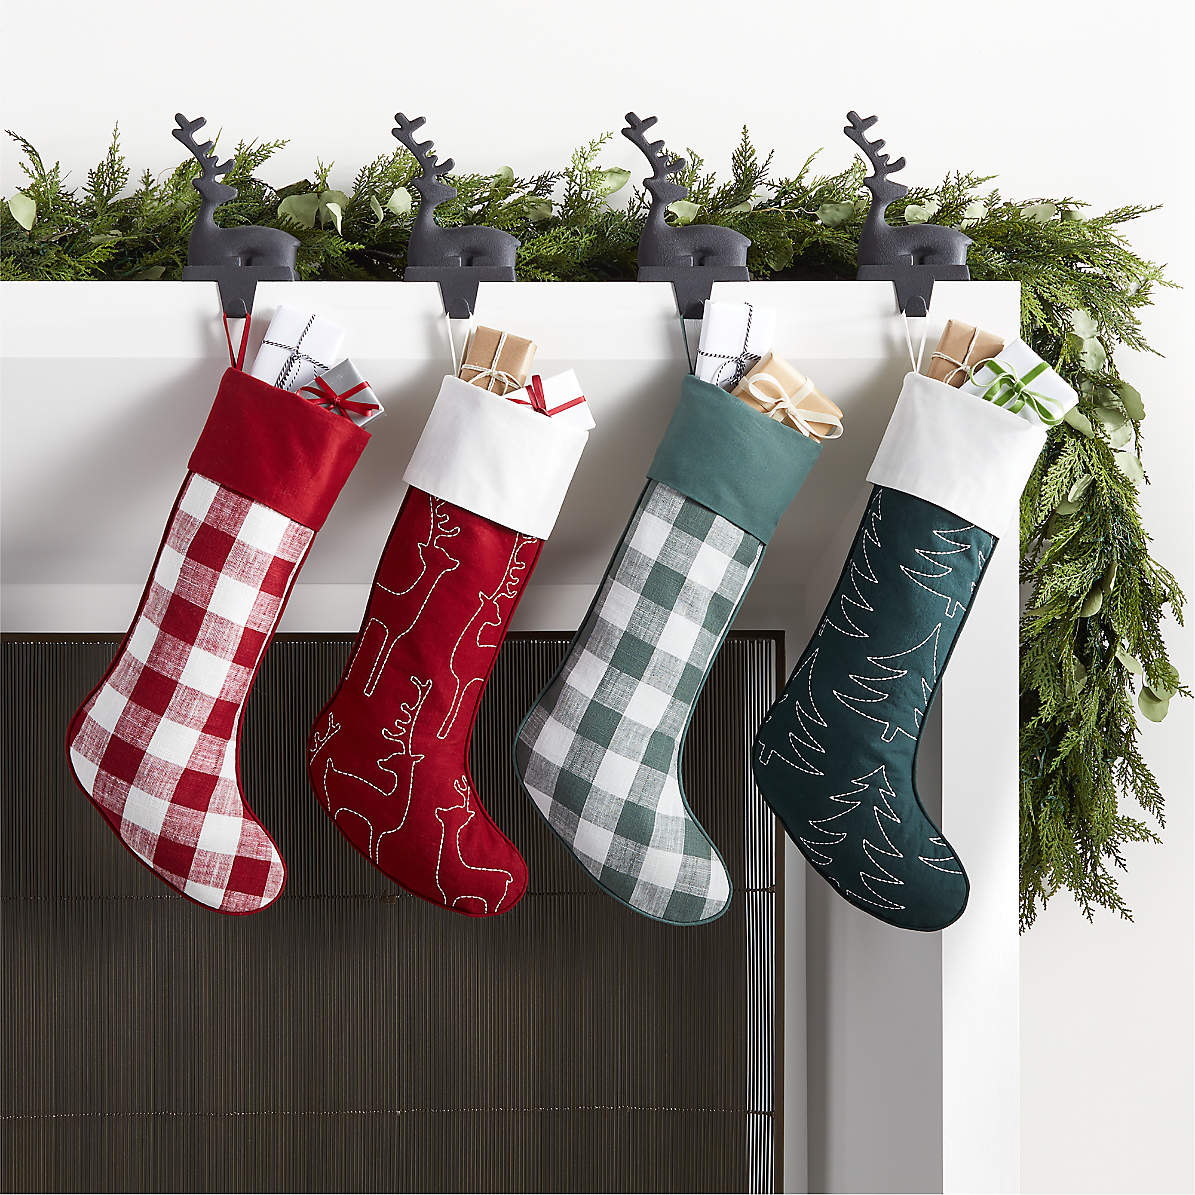 40+ Designs Pattern For Christmas Stocking titiandagung